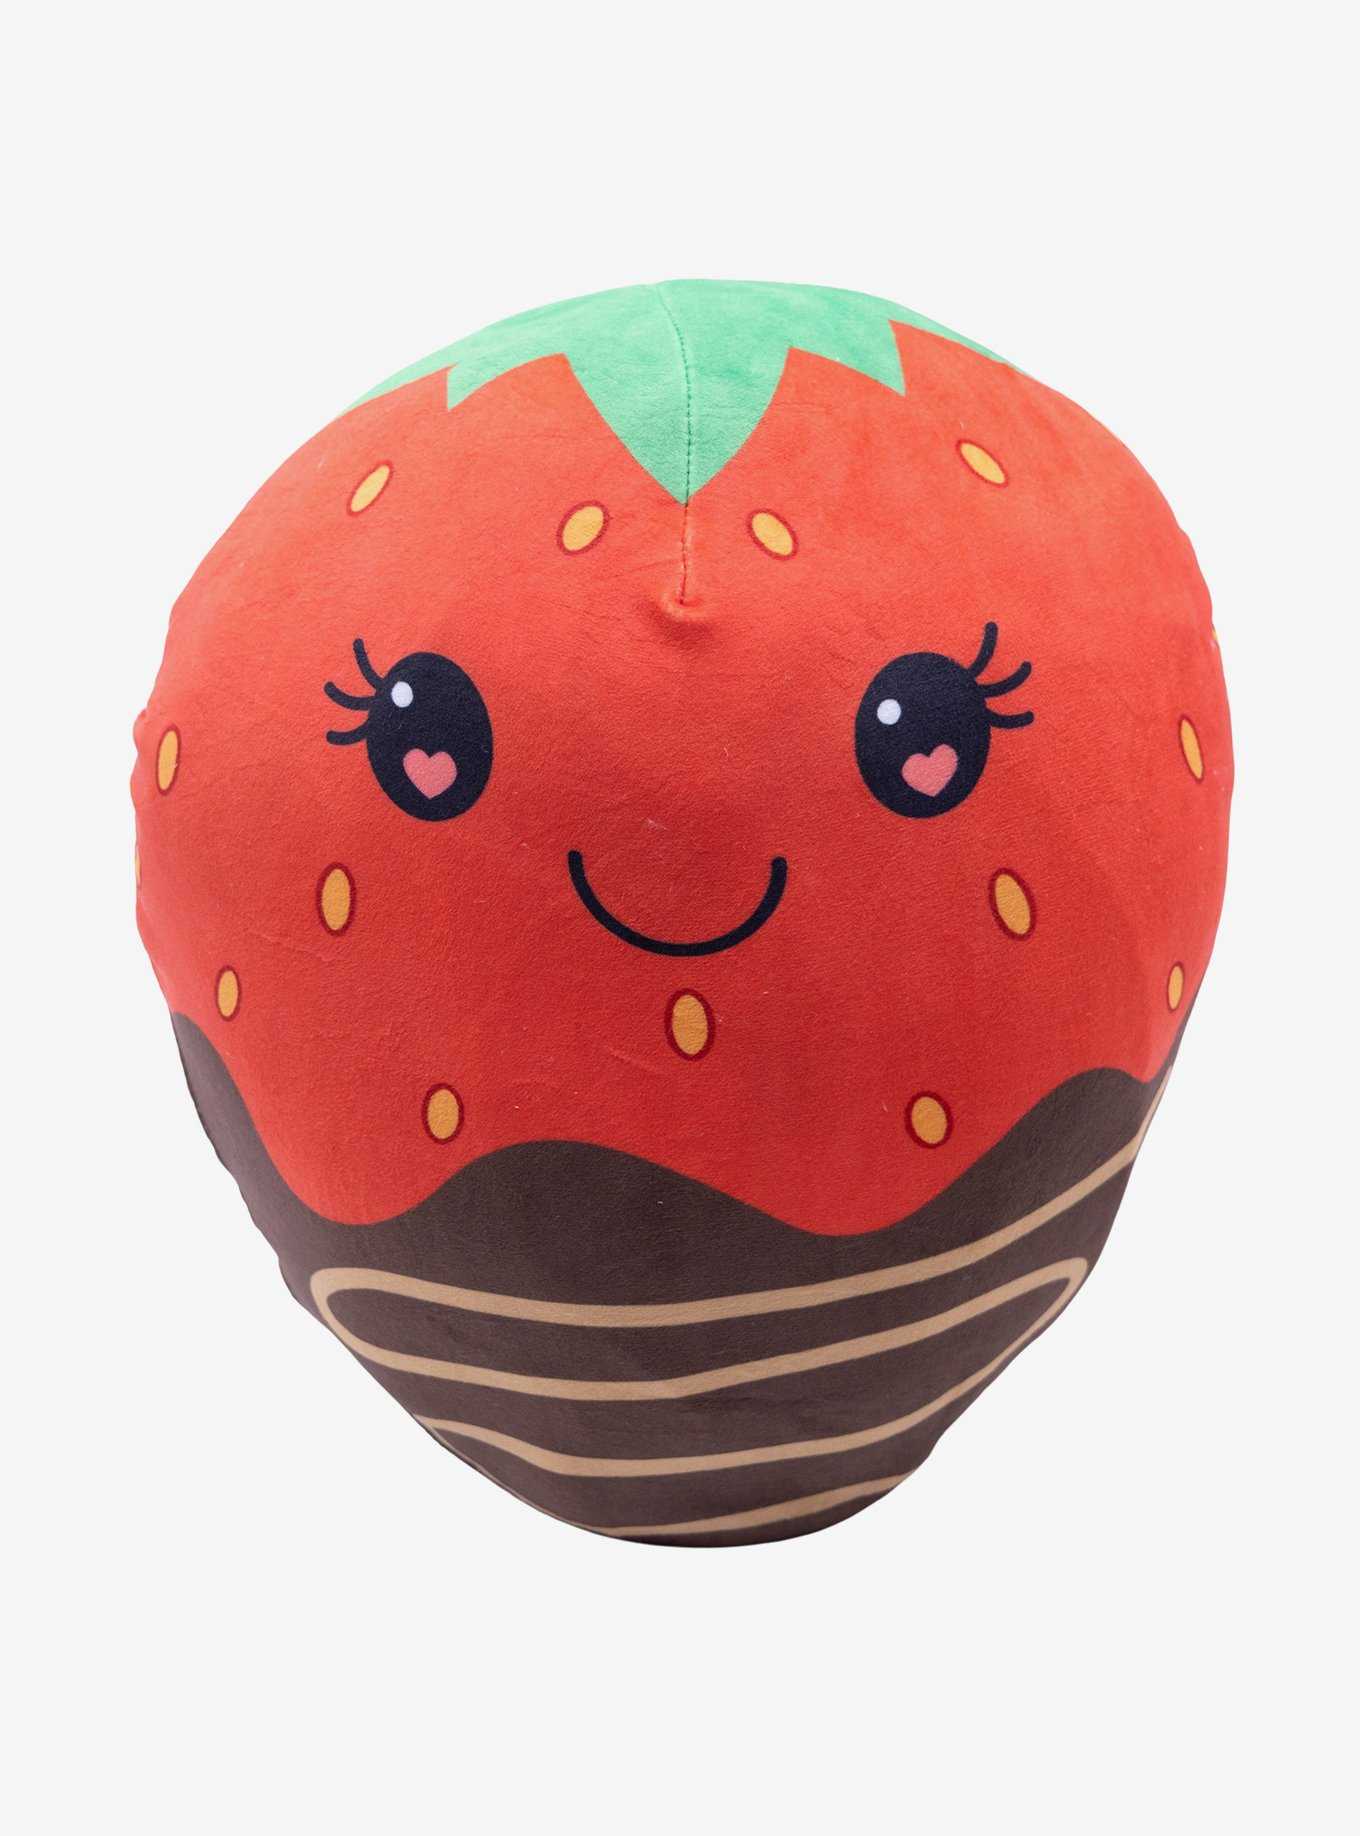 Plushible 2-in-1 Chocolate Strawberry Snugible, , hi-res